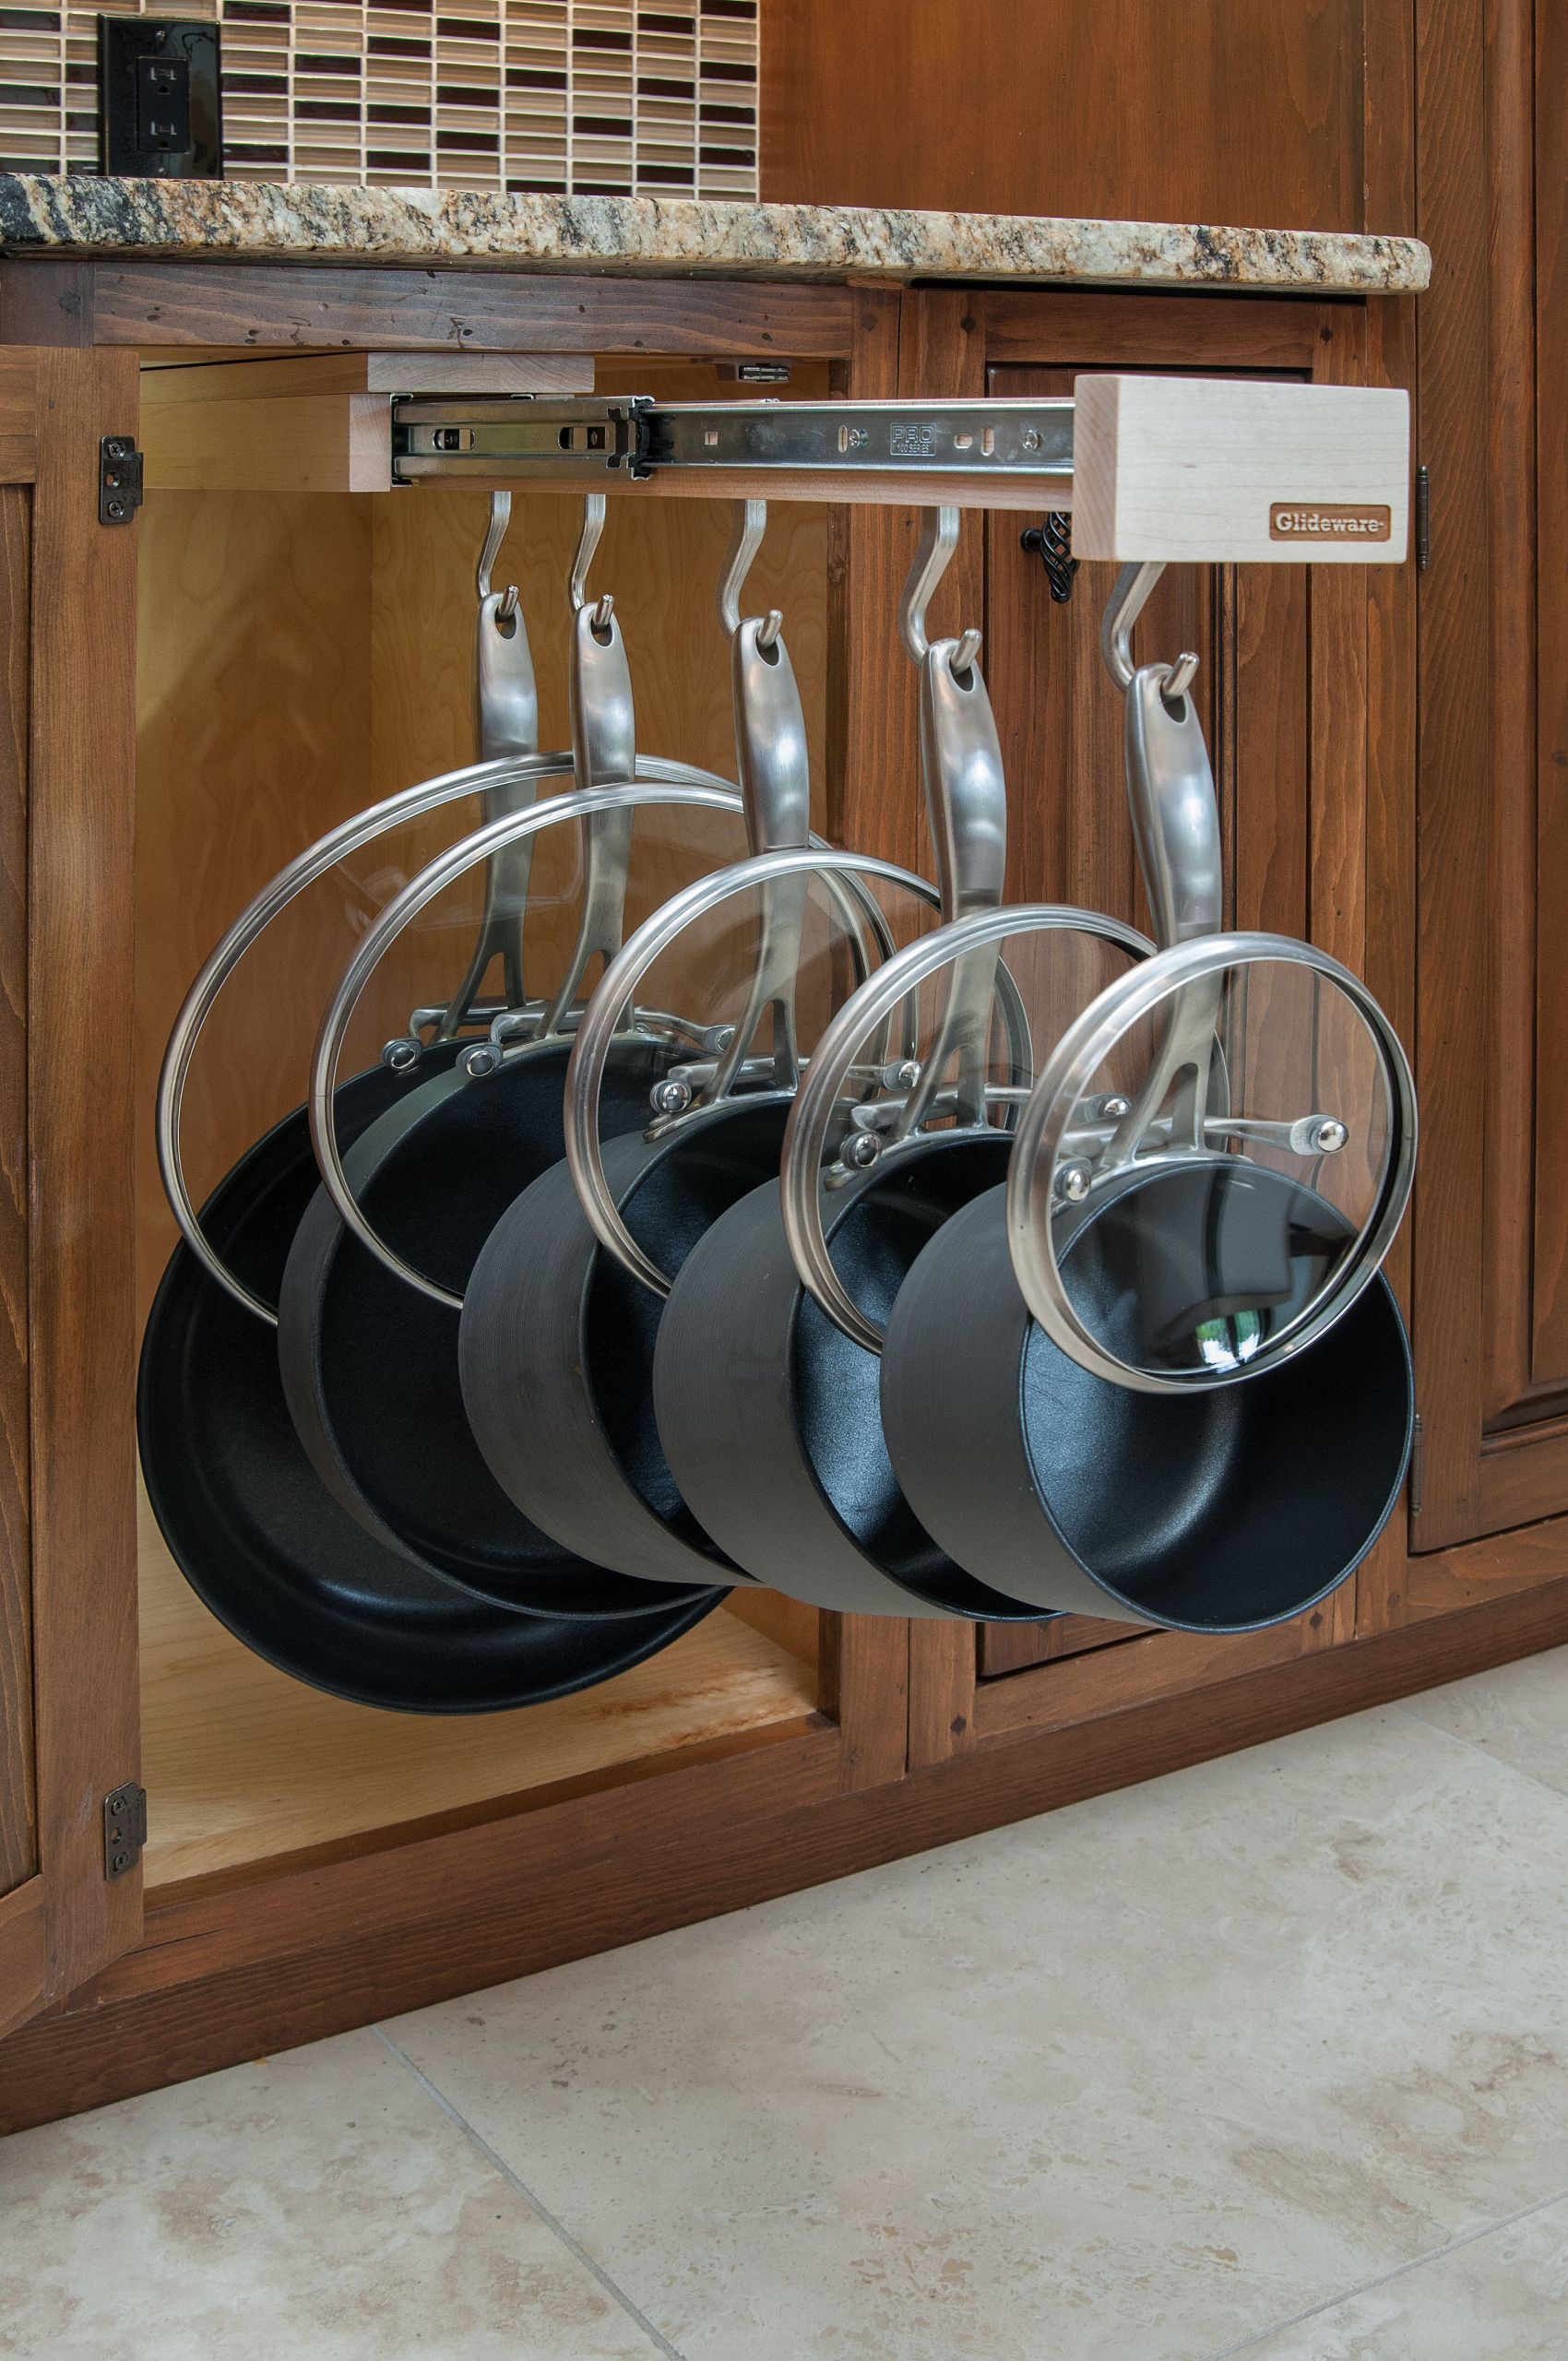 Kitchen Pots And Pans Organizer
 Great way to organize your pots pans